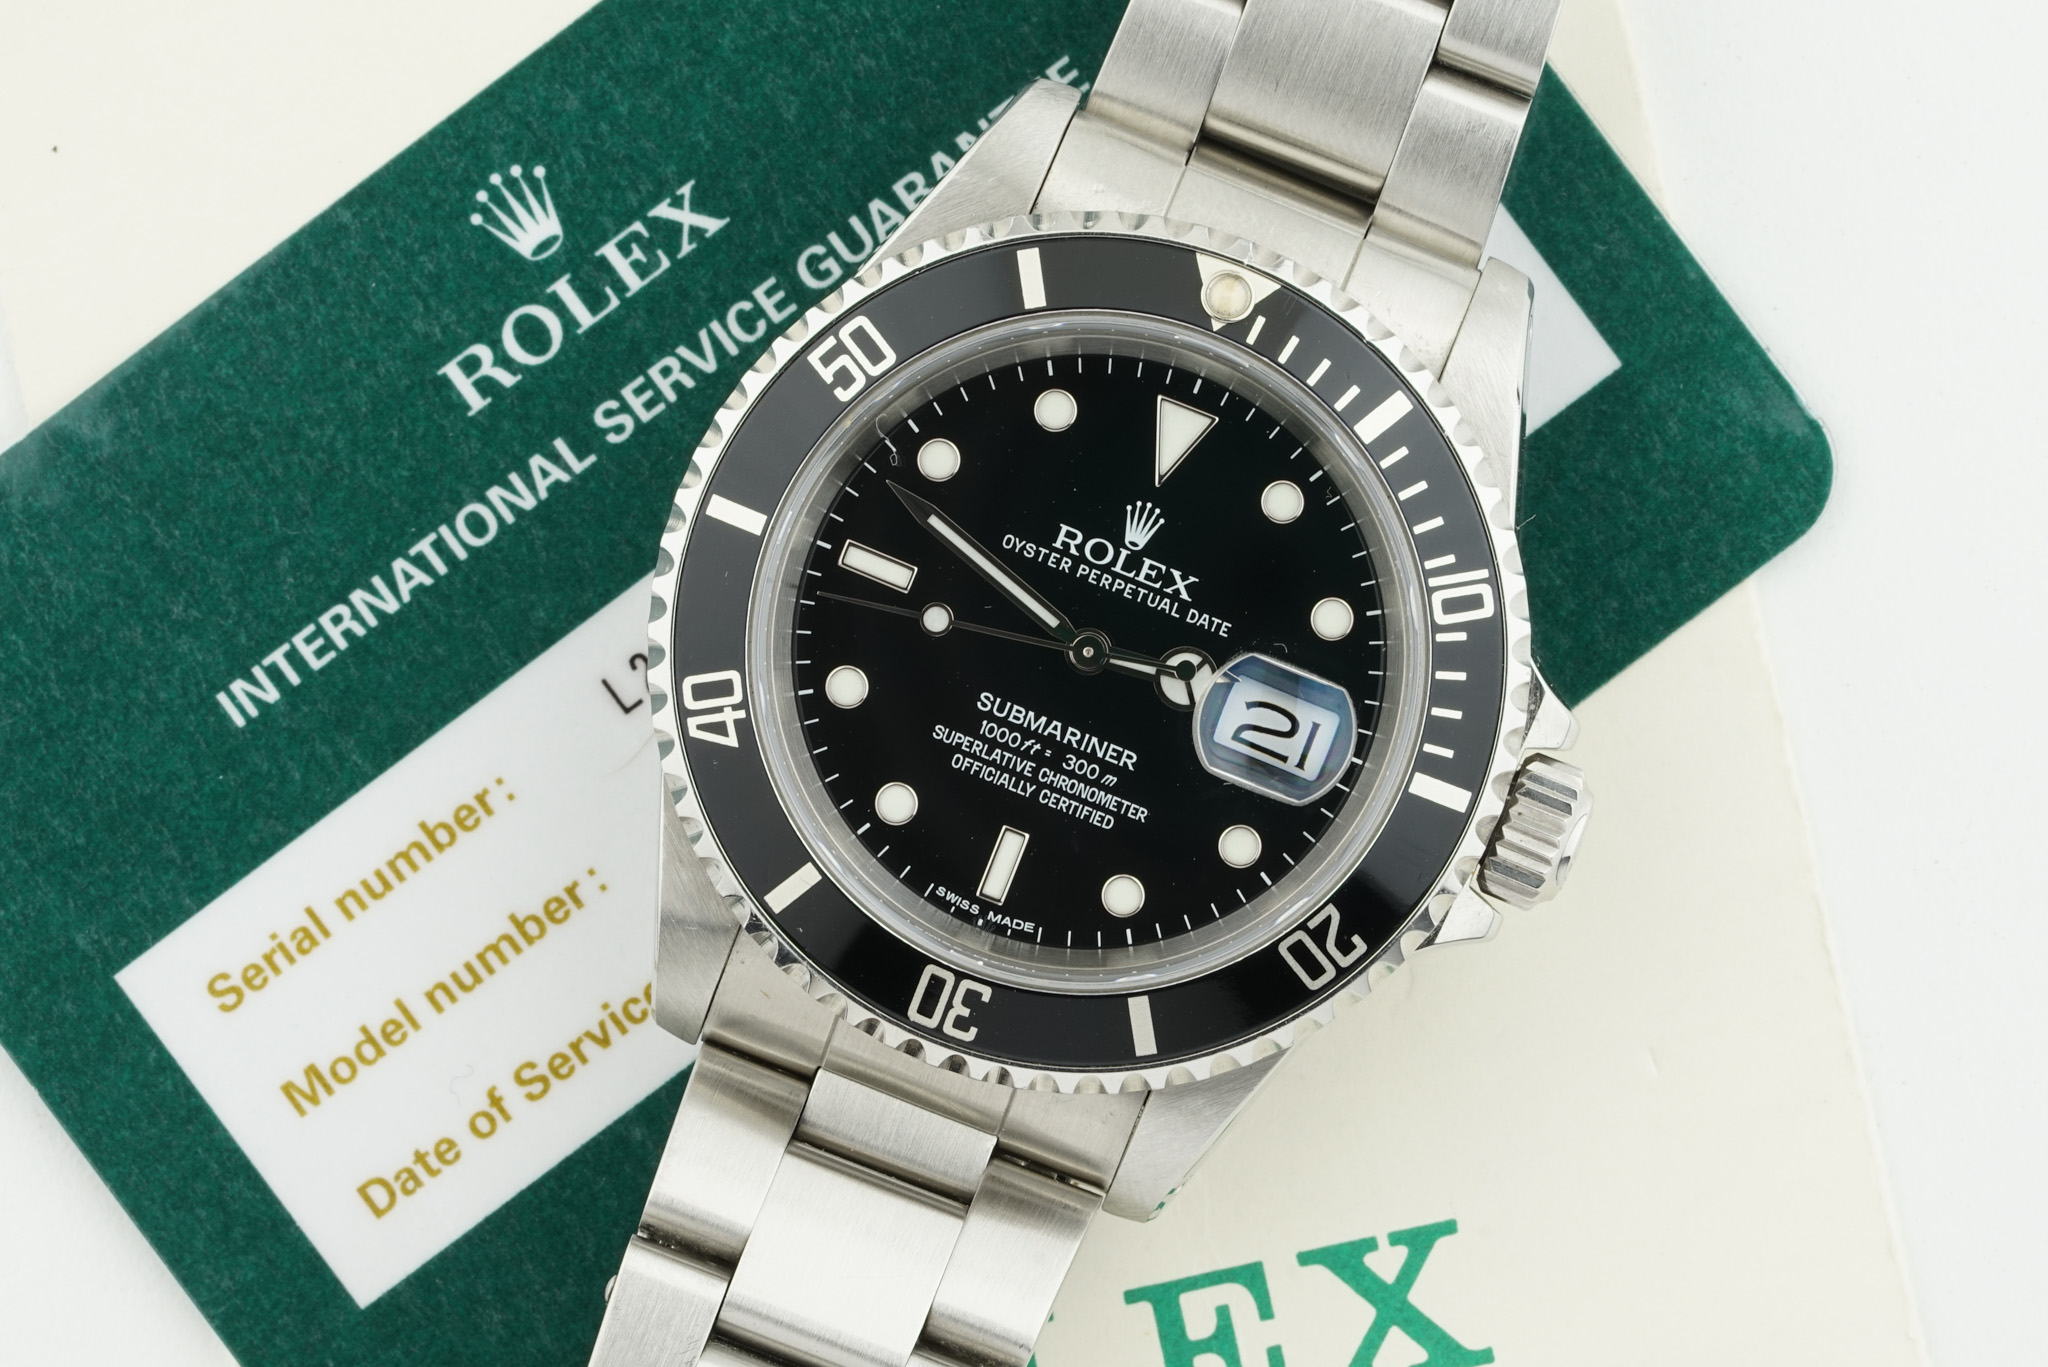 ROLEX OYSTER PERPETUAL DATE SUBMARINER W/ GUARANTEE PAPERS REF. 16610 CIRCA 1989